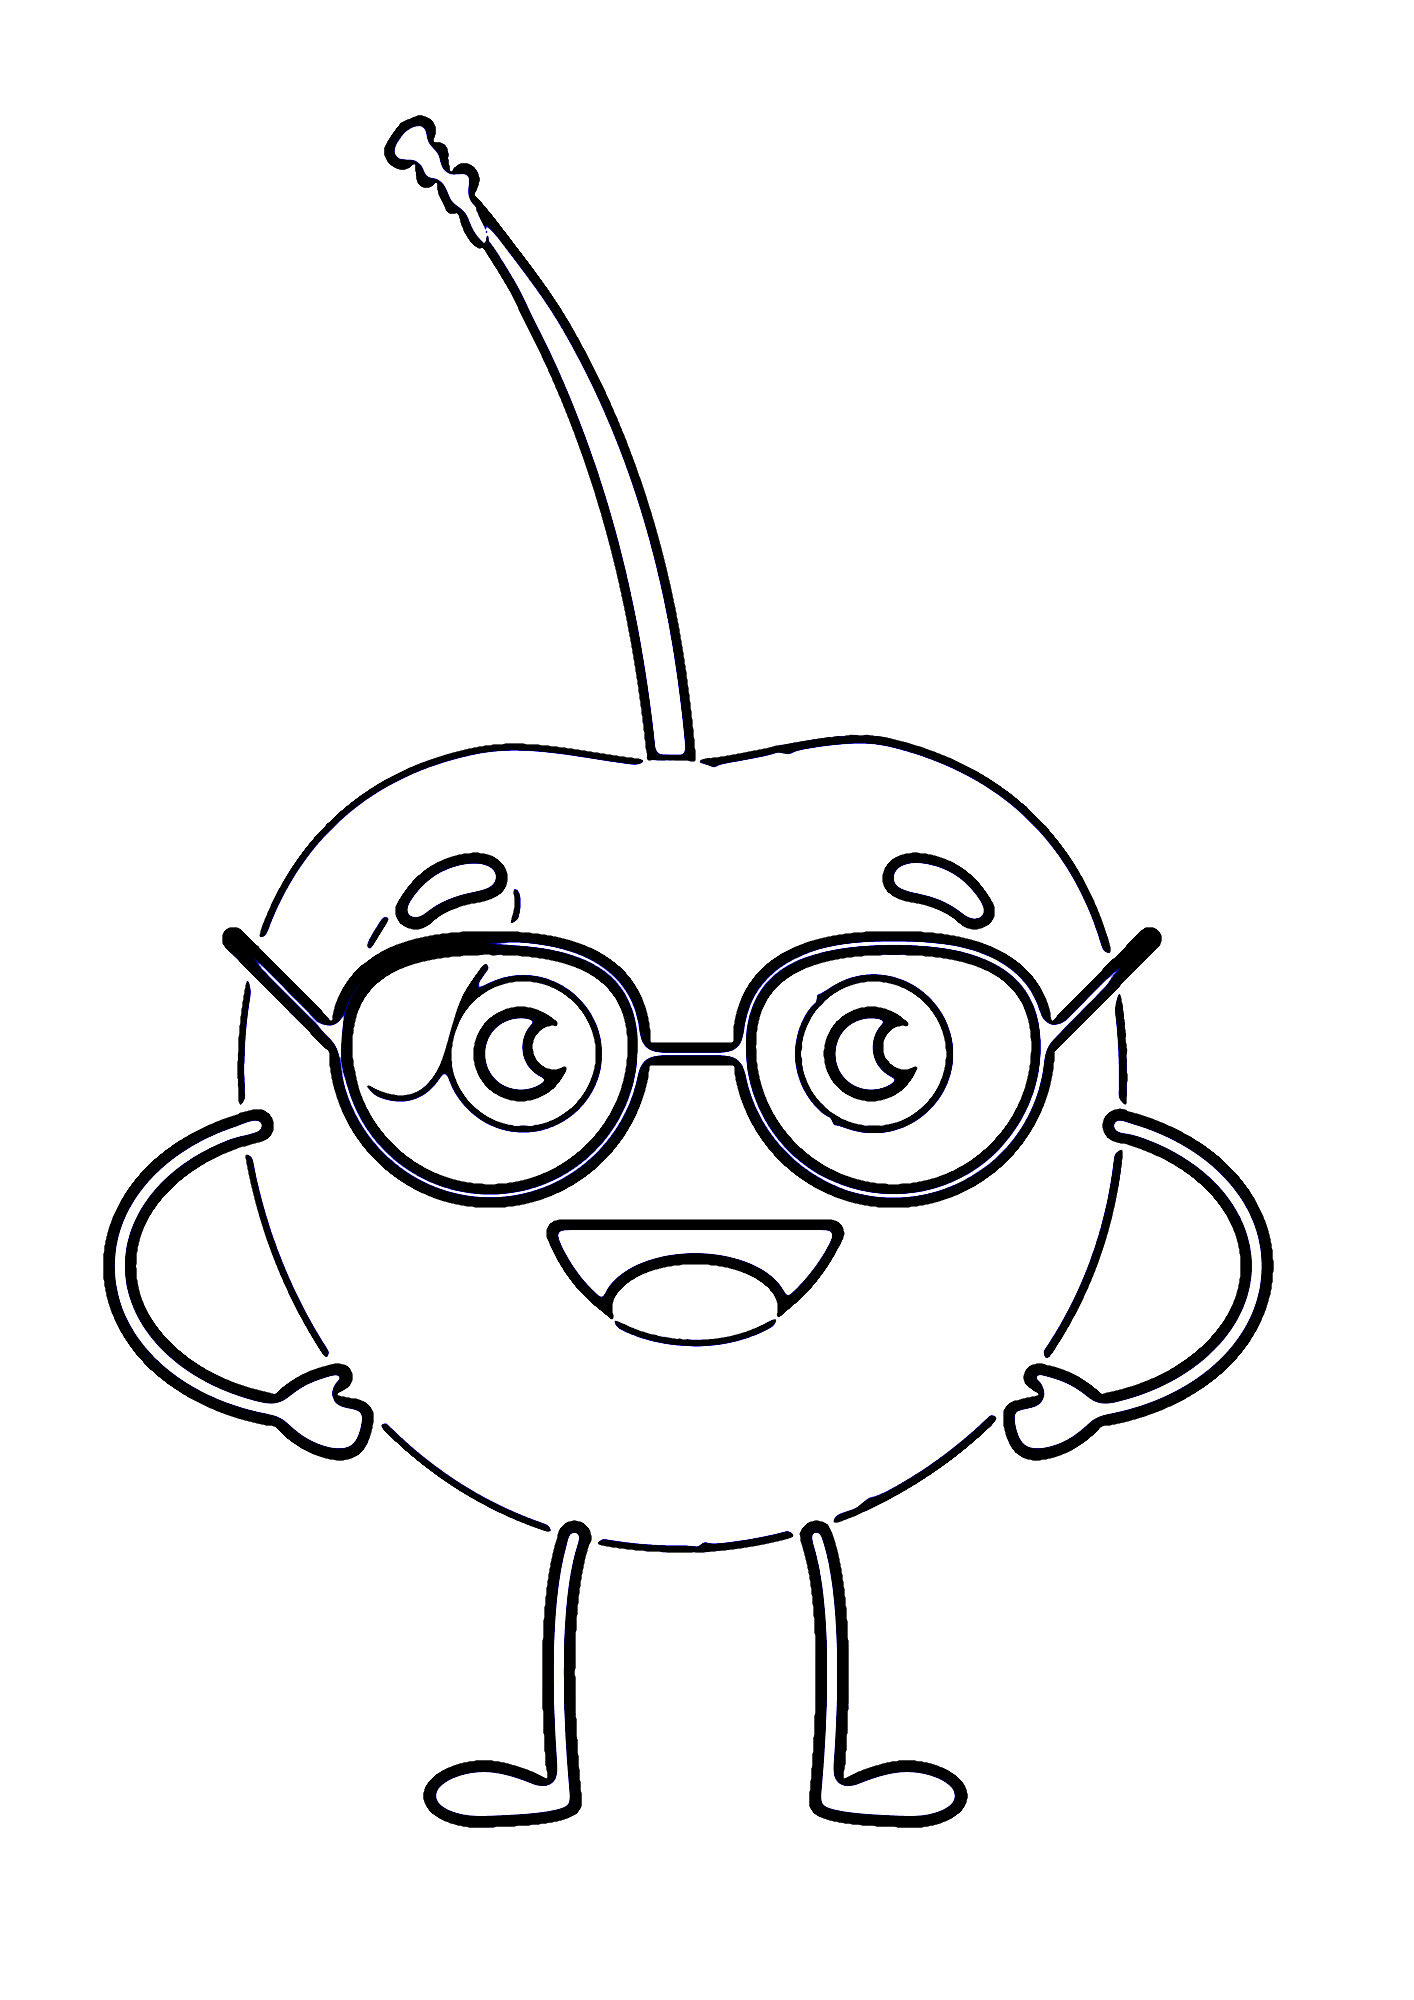 Baby Cherry Coloring Pages